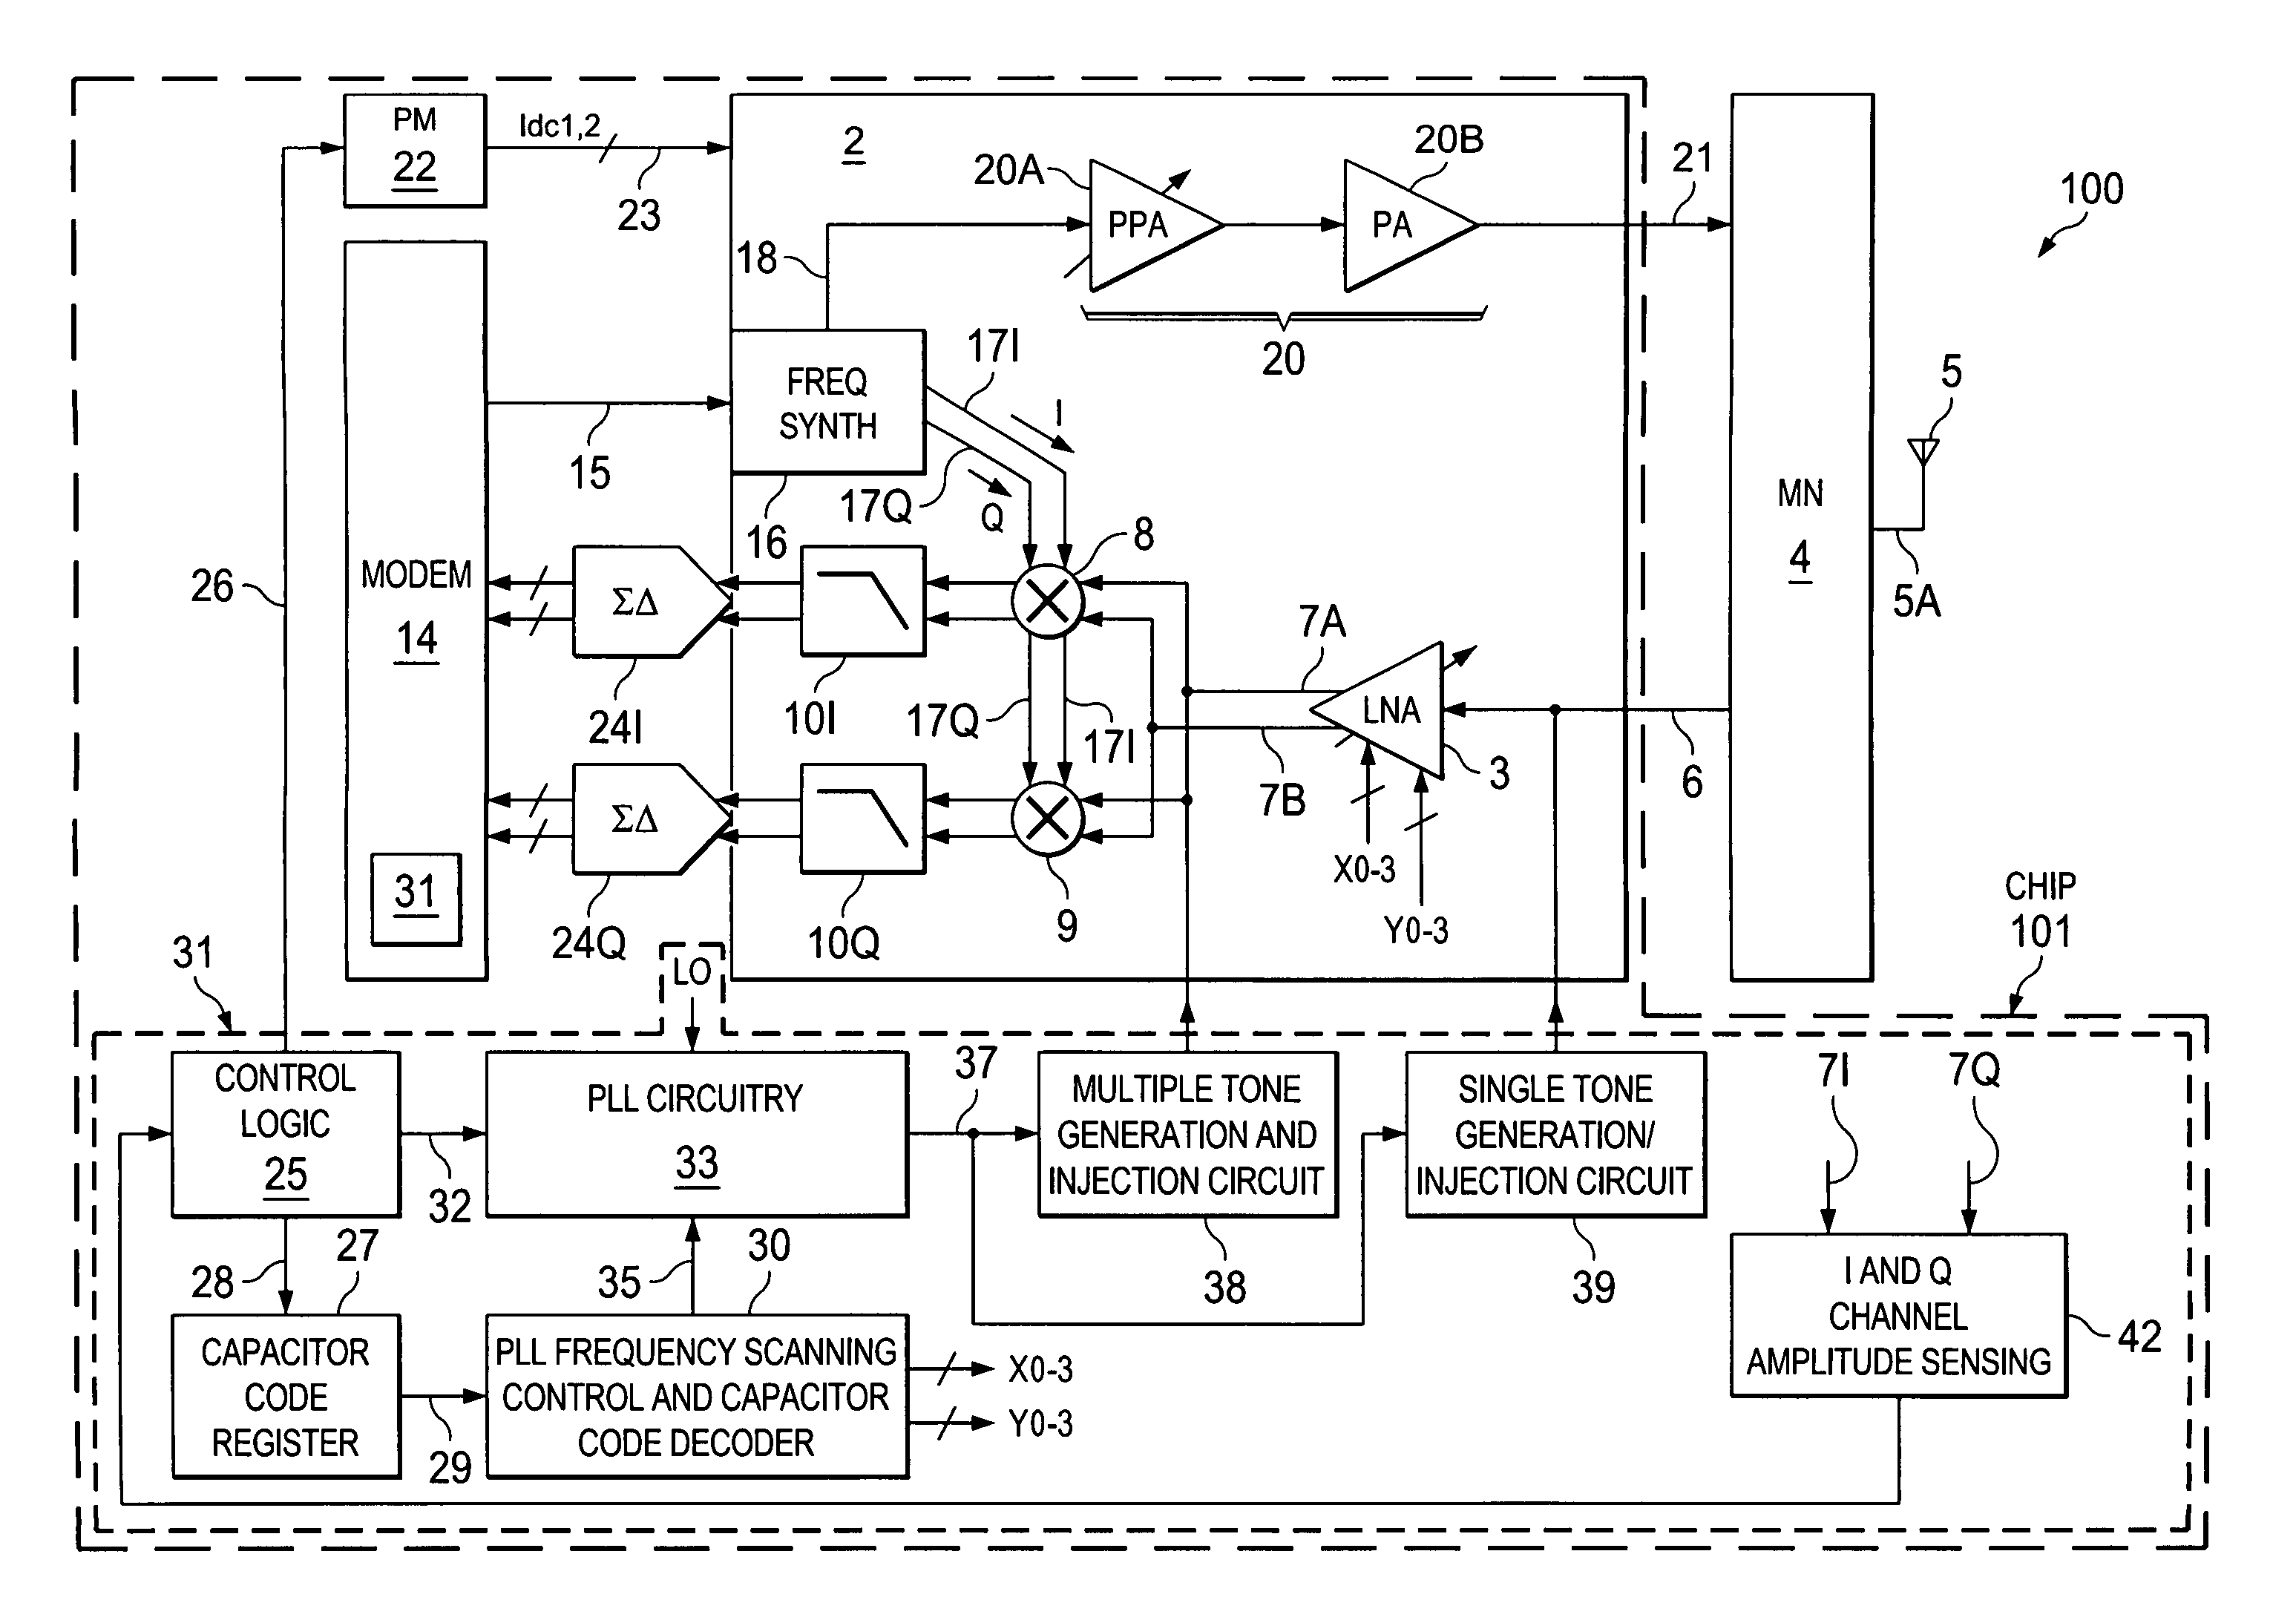 Built in self test and method for RF transceiver systems